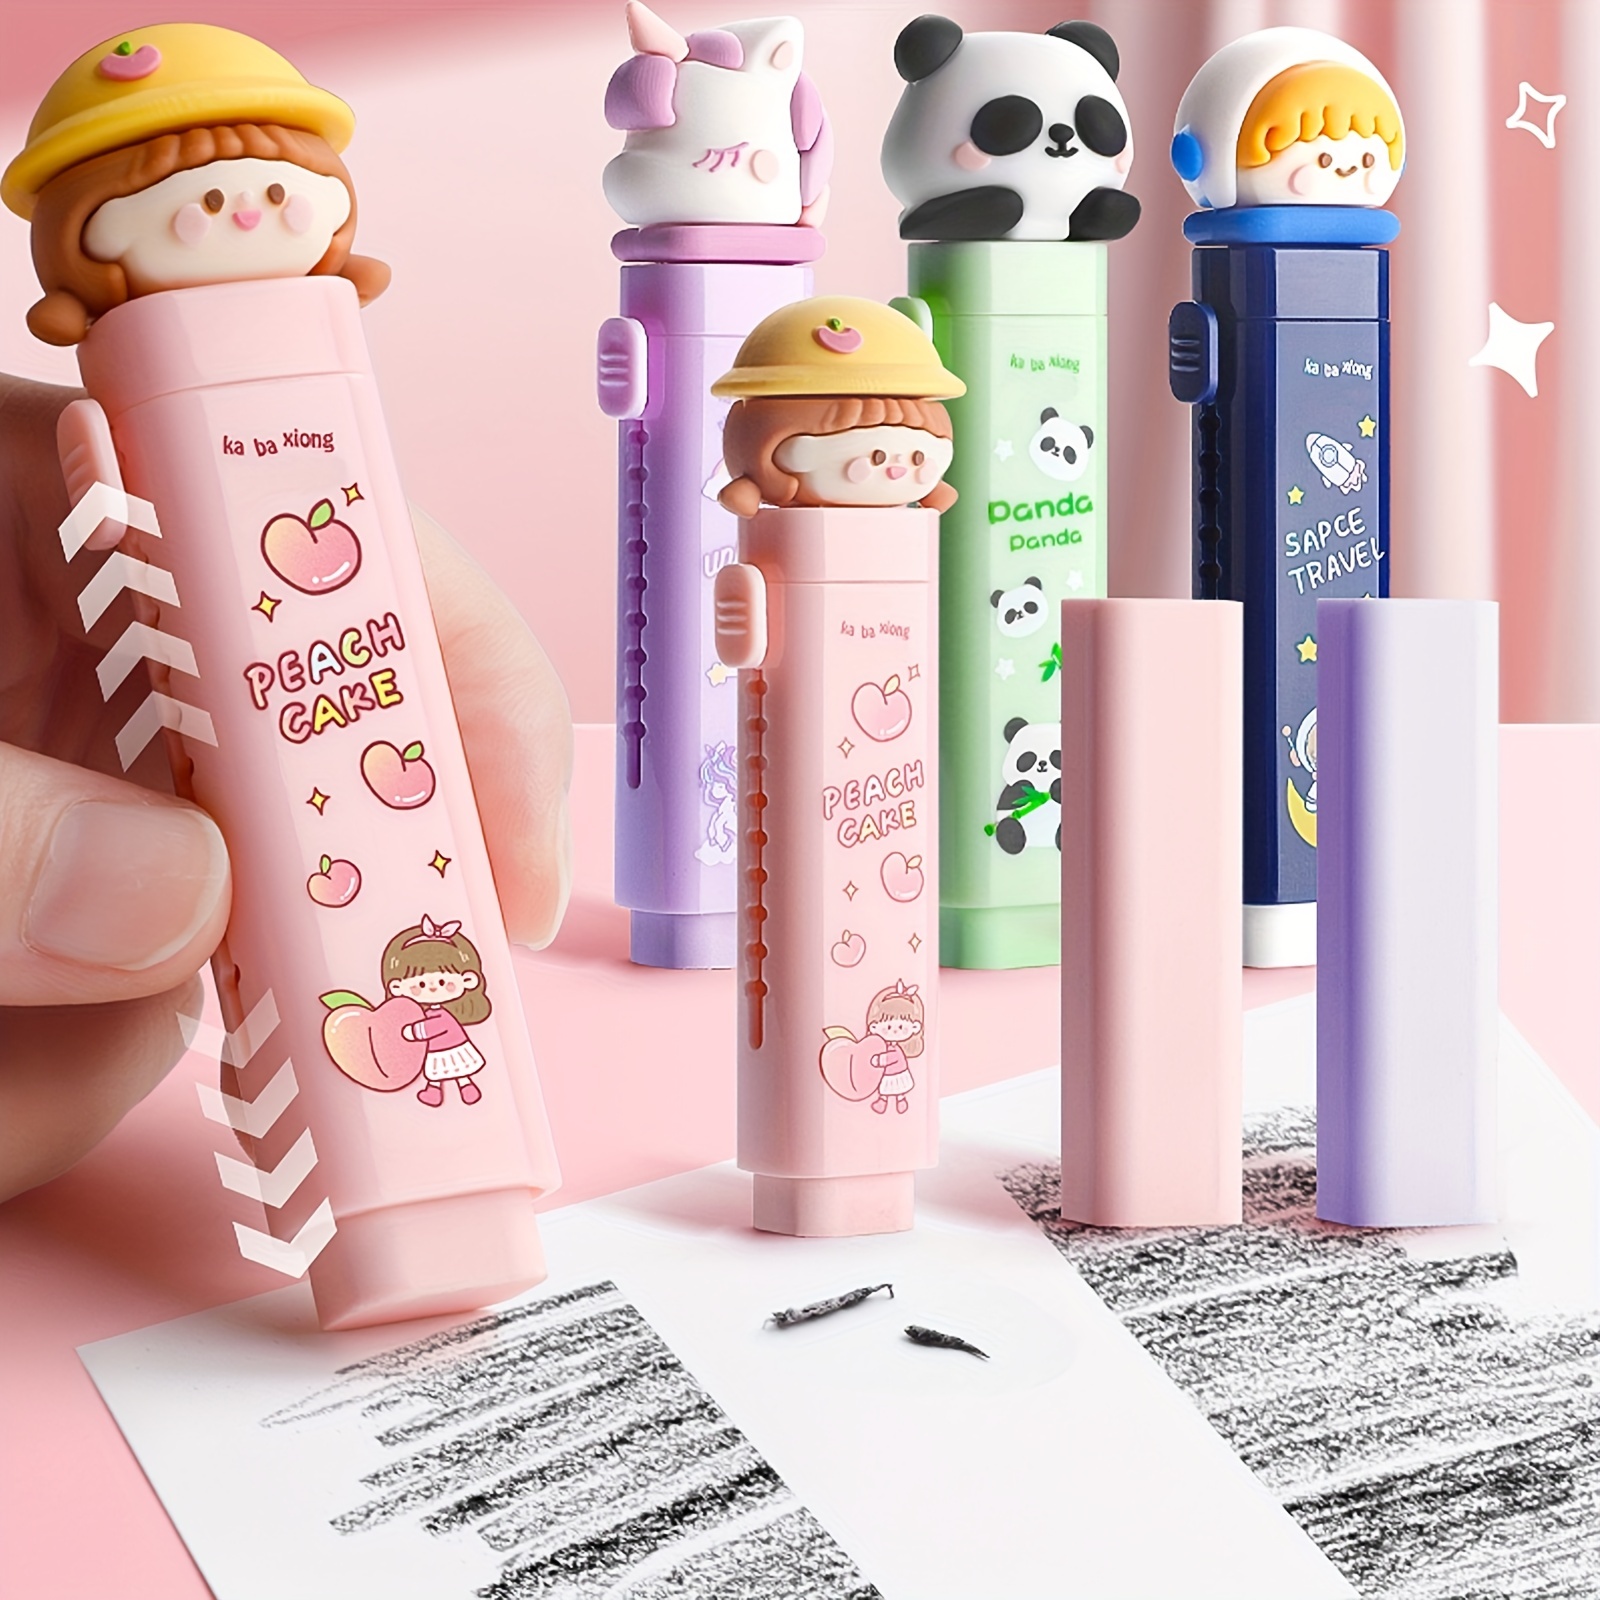  Hello Kitty 0.5mm Mechanical Pencil w/Hello Kitty Figure 1PC  (Pink) : Office Products